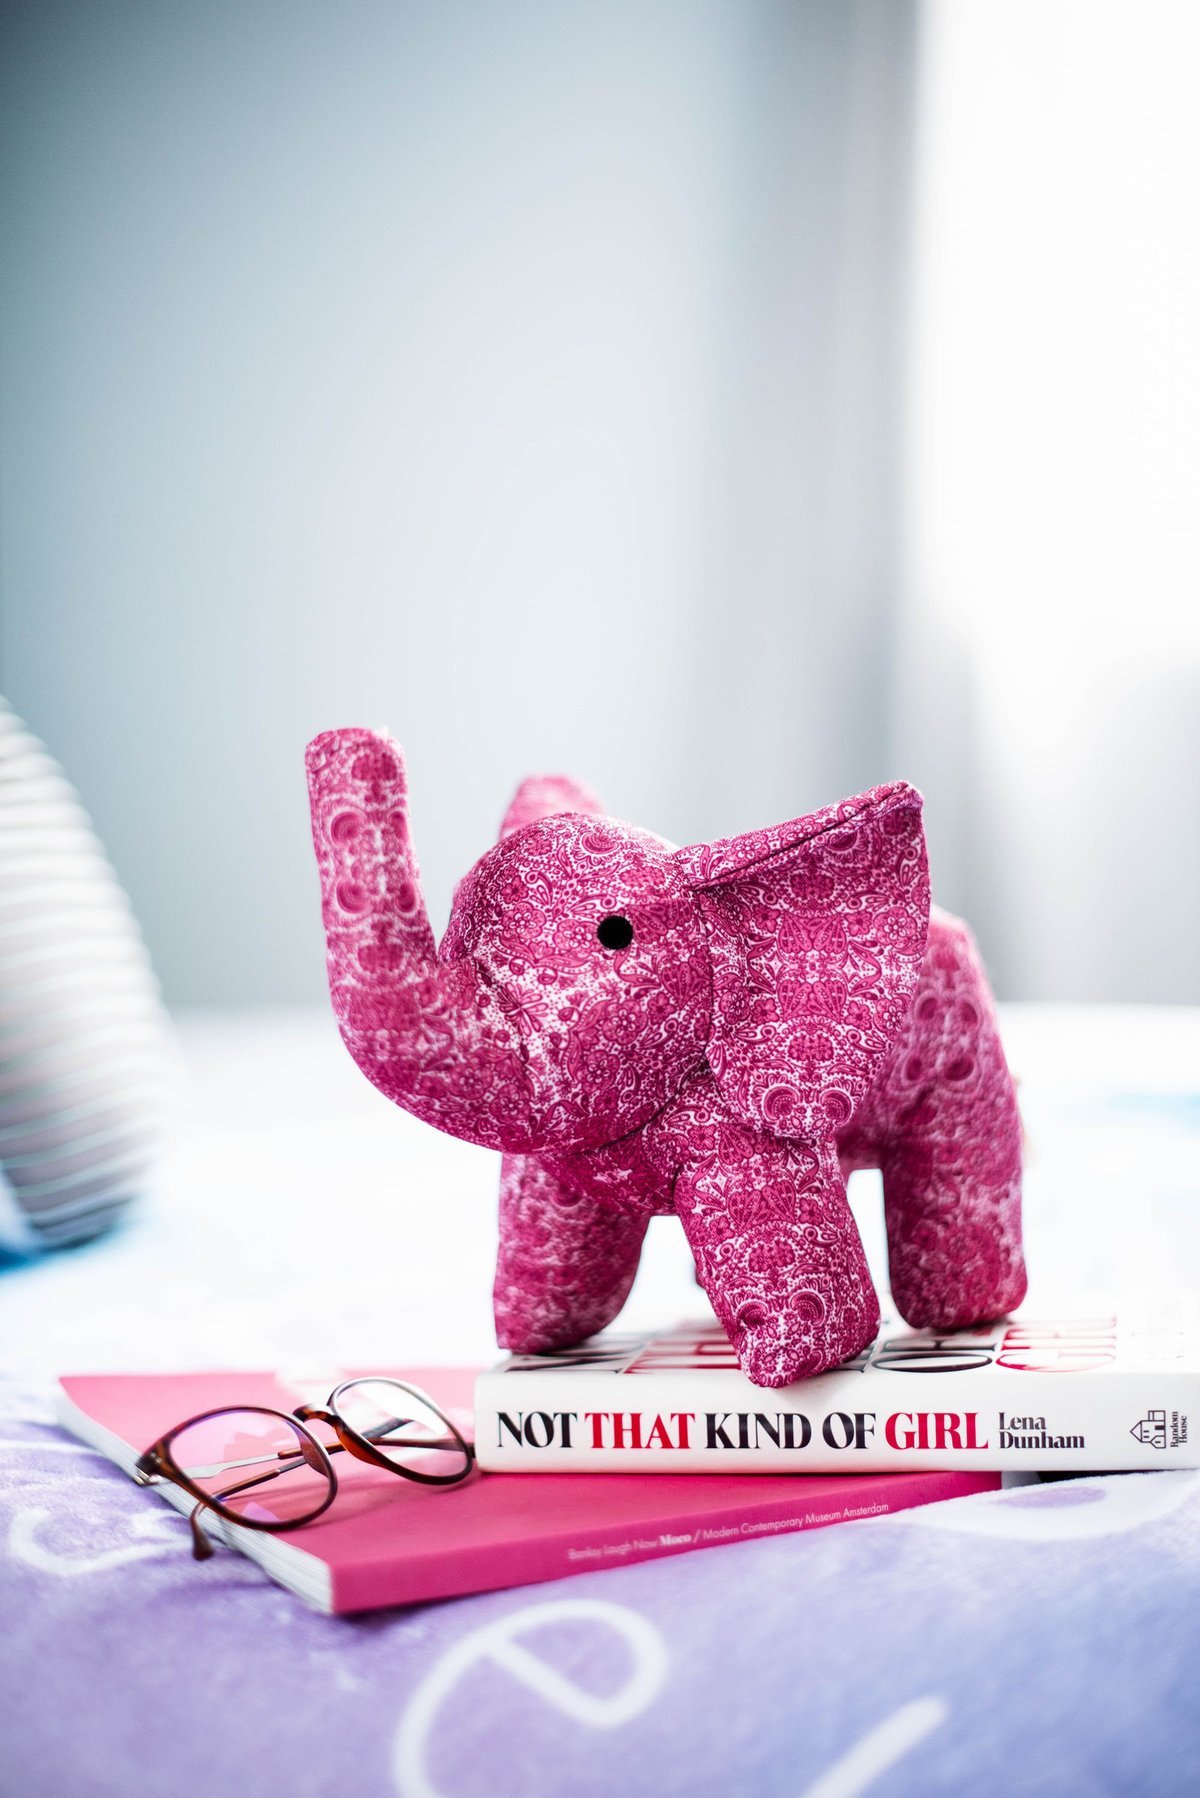 elephantwildlife:   Our new Stuffed Elephants are your favorite t-shirt prints made